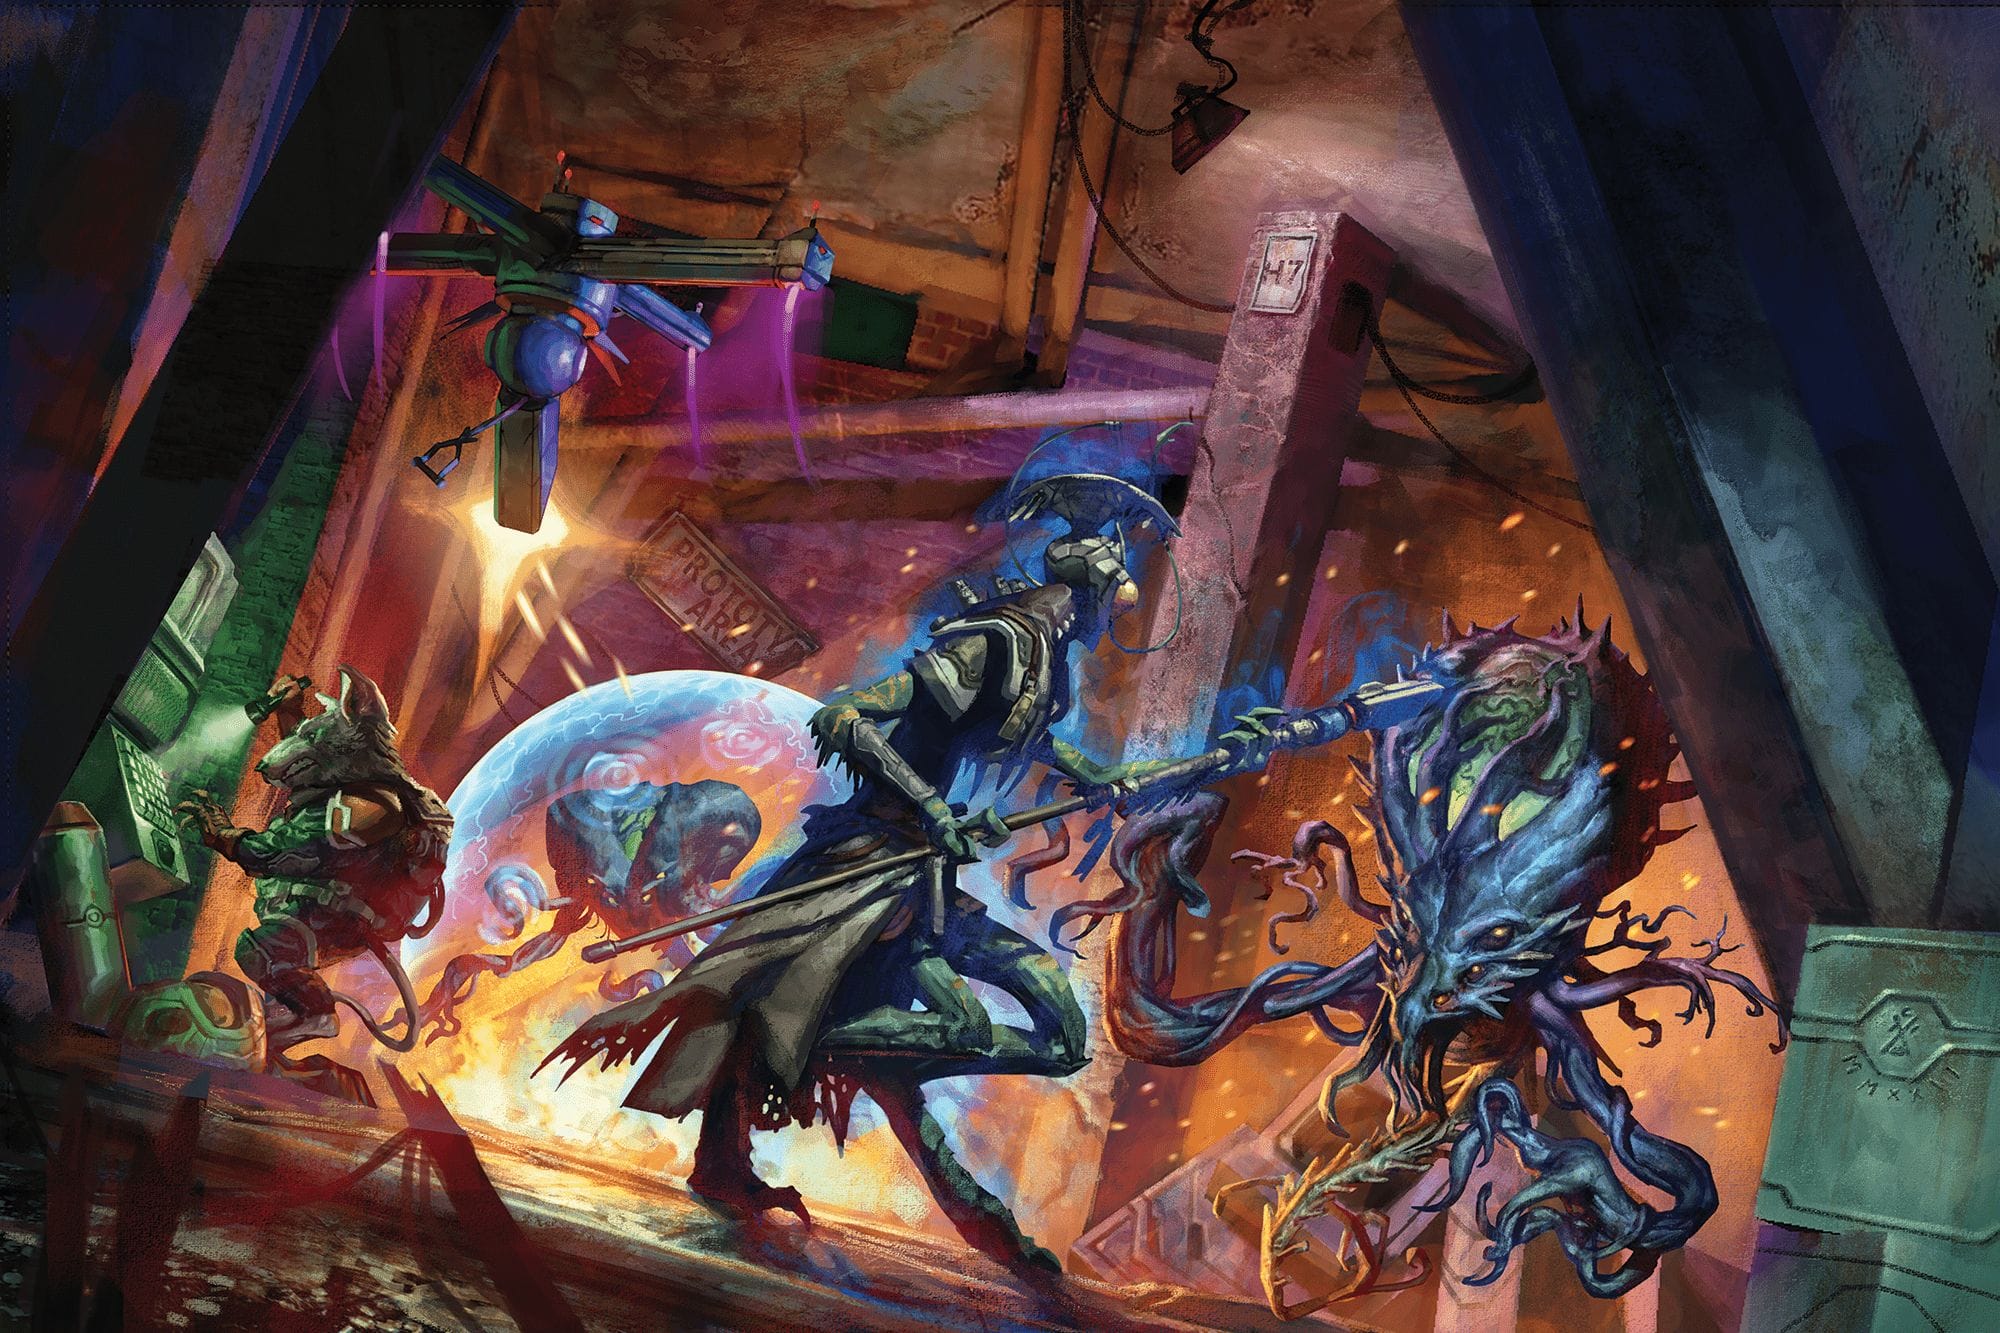 Starfinder's Drift Hackers Players Guide art shows aliens in sci-fi combat